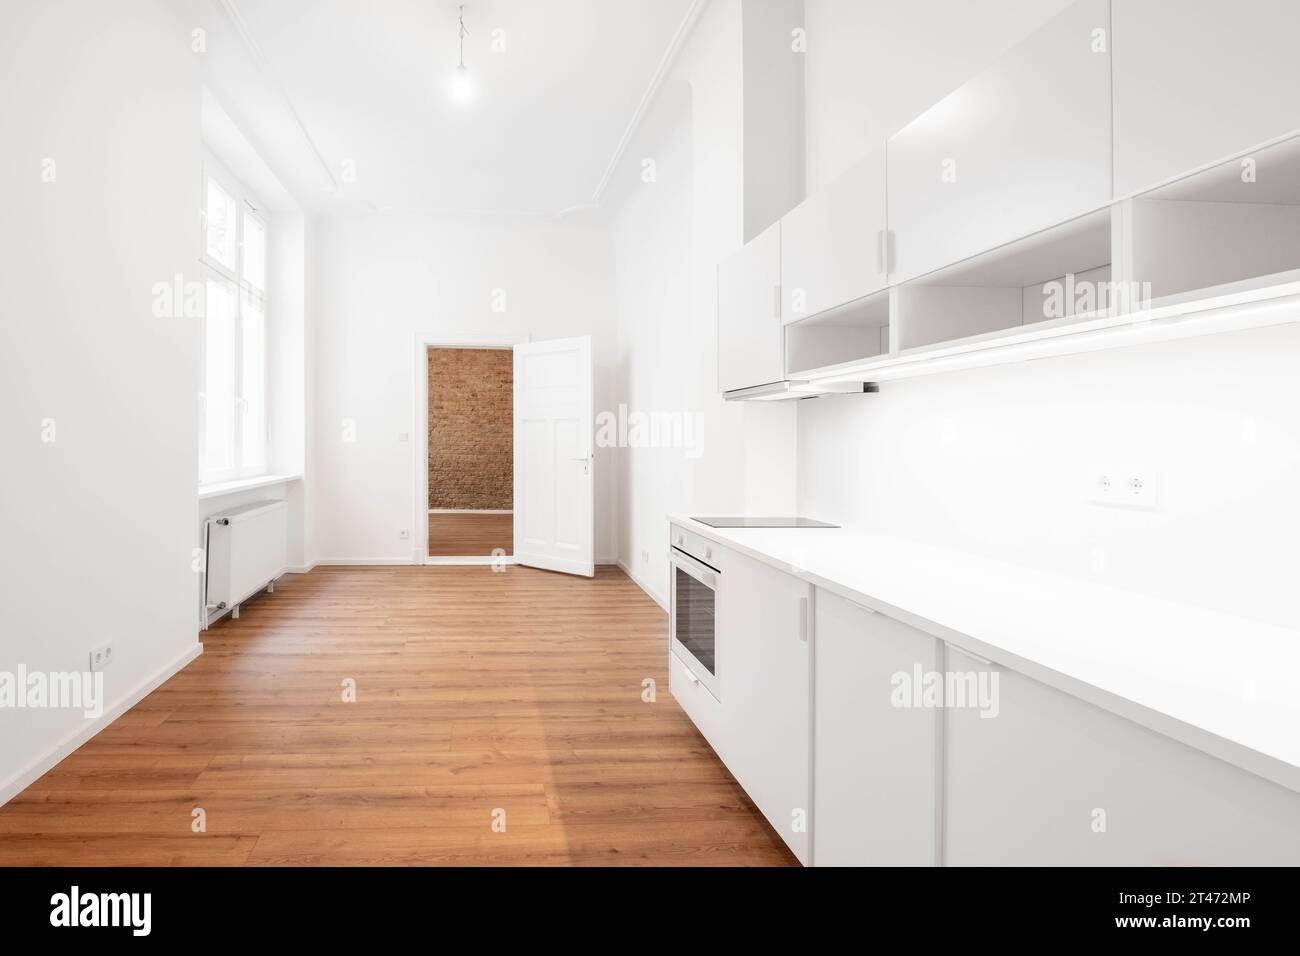 build in kitchen or kitchenette in new apartment room Stock Photo